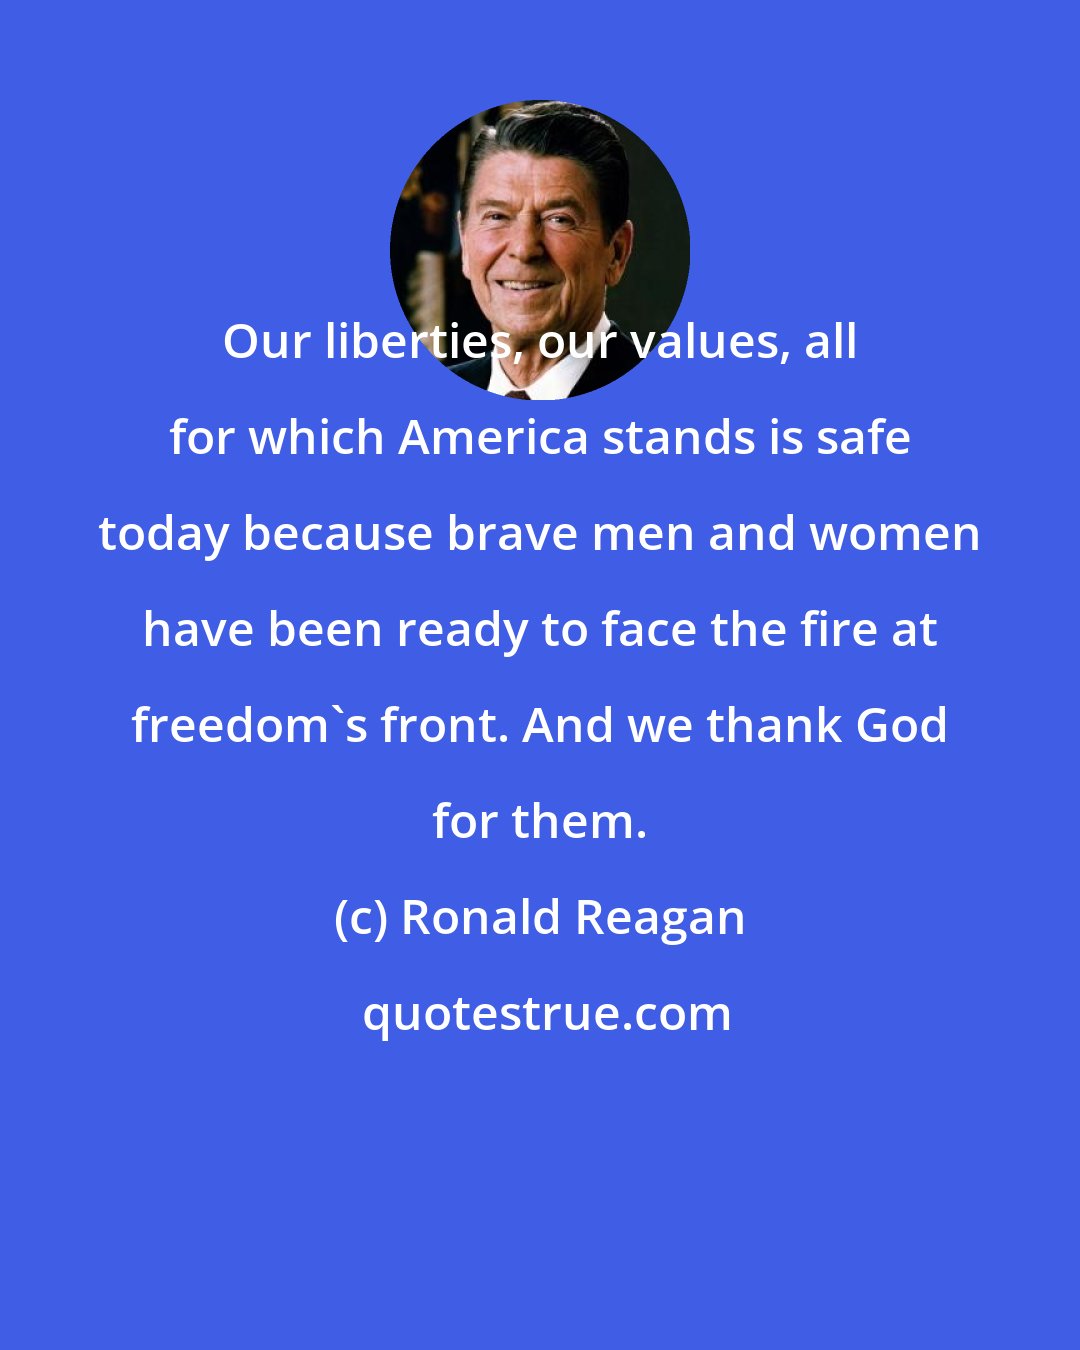 Ronald Reagan: Our liberties, our values, all for which America stands is safe today because brave men and women have been ready to face the fire at freedom's front. And we thank God for them.